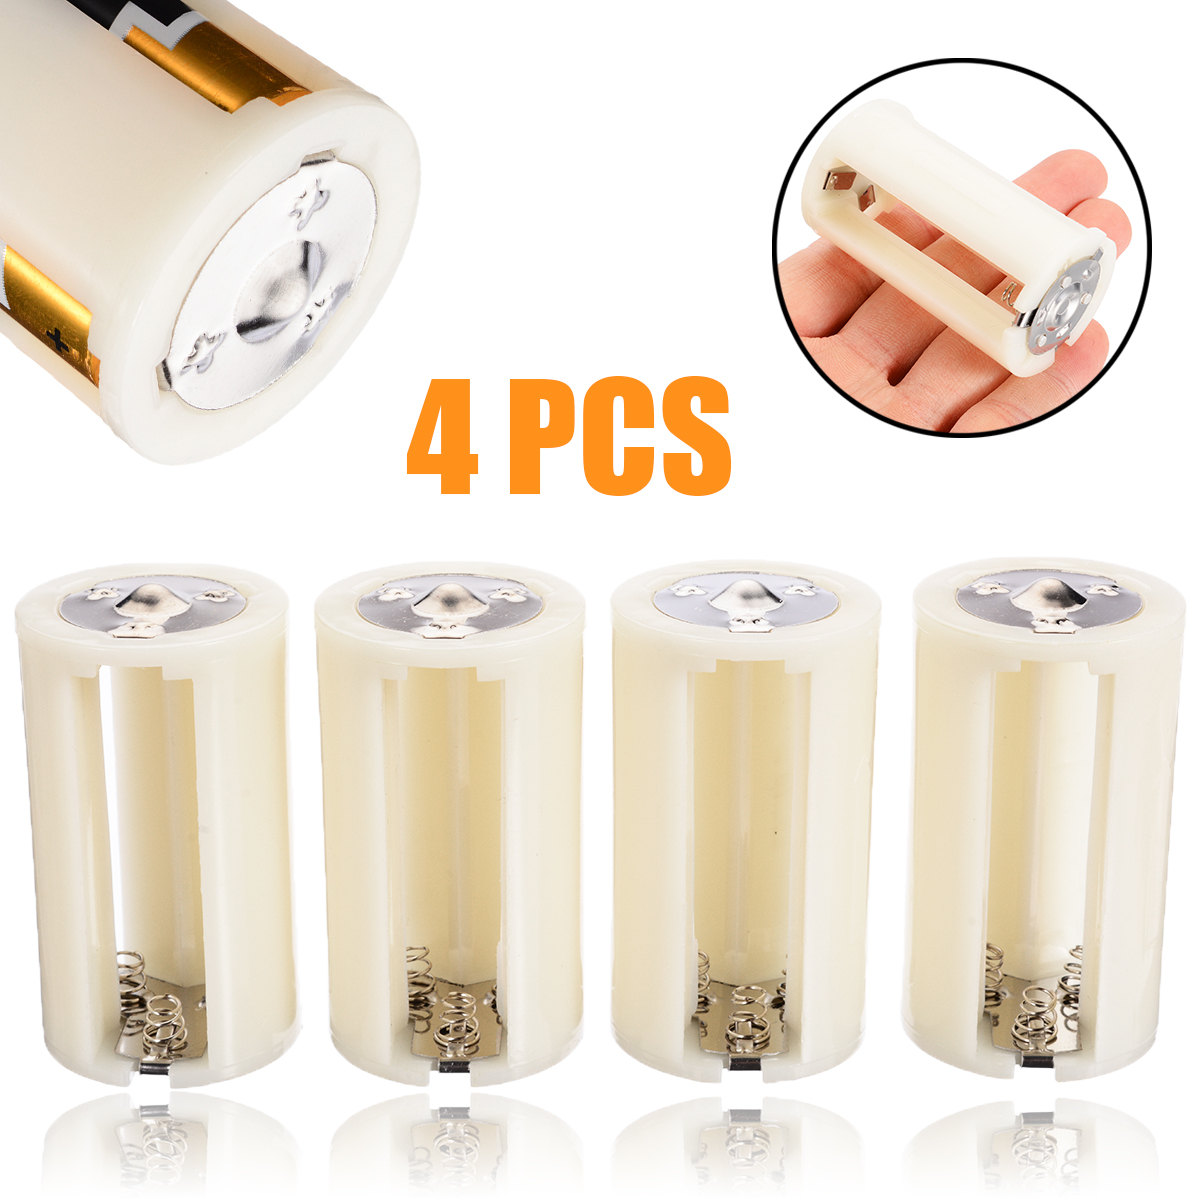 Portable 4PCS 4AAA to C Size Parallel Battery Convertor Adapter Holder Cases Box 